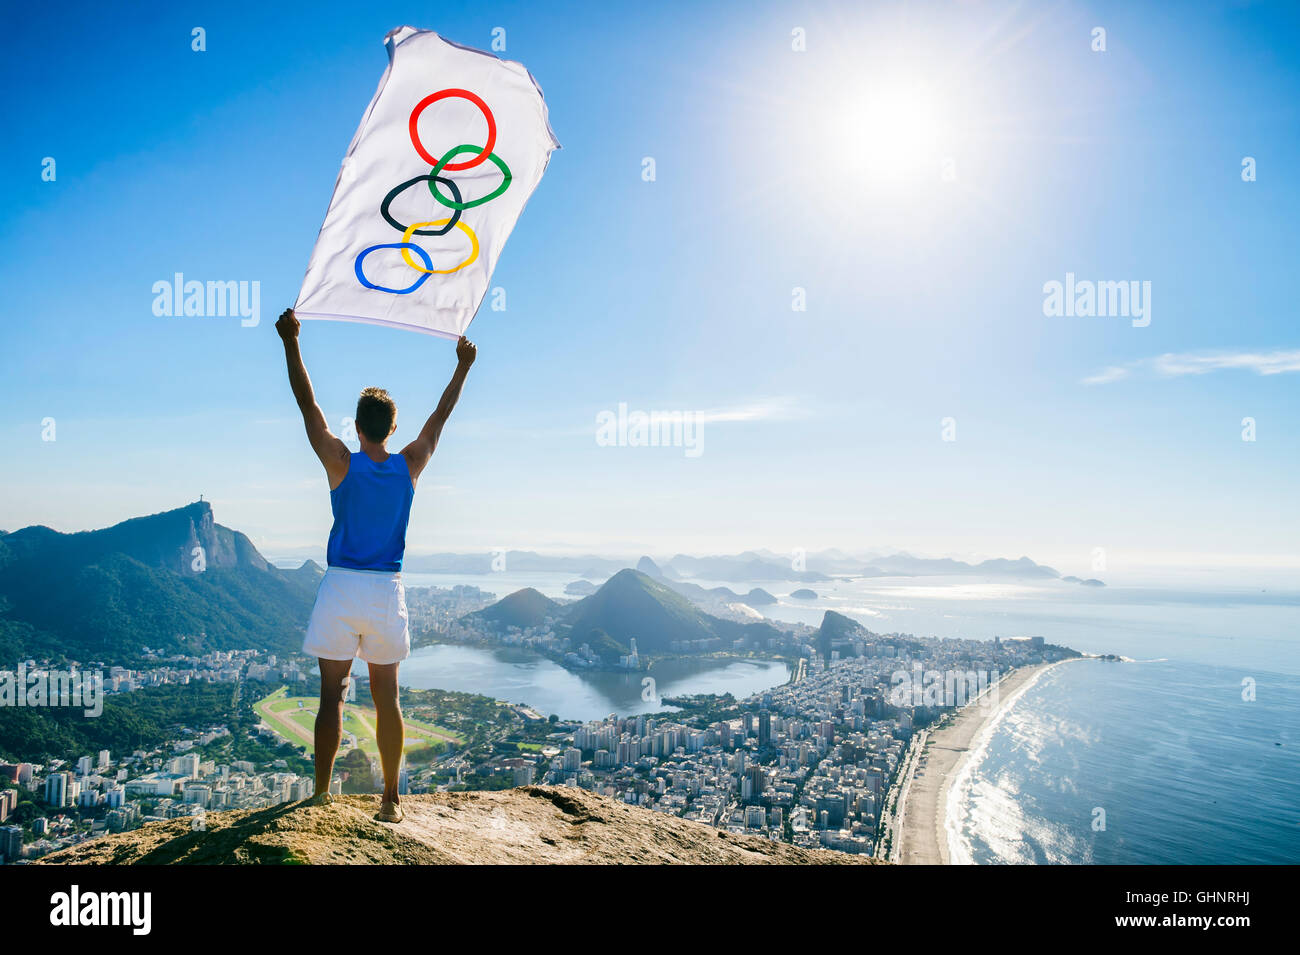 RIO DE JANEIRO - MARCH 21, 2016: Athlete stands holding Olympic flag above a city skyline view of Corcovado and Zona Sul. Stock Photo